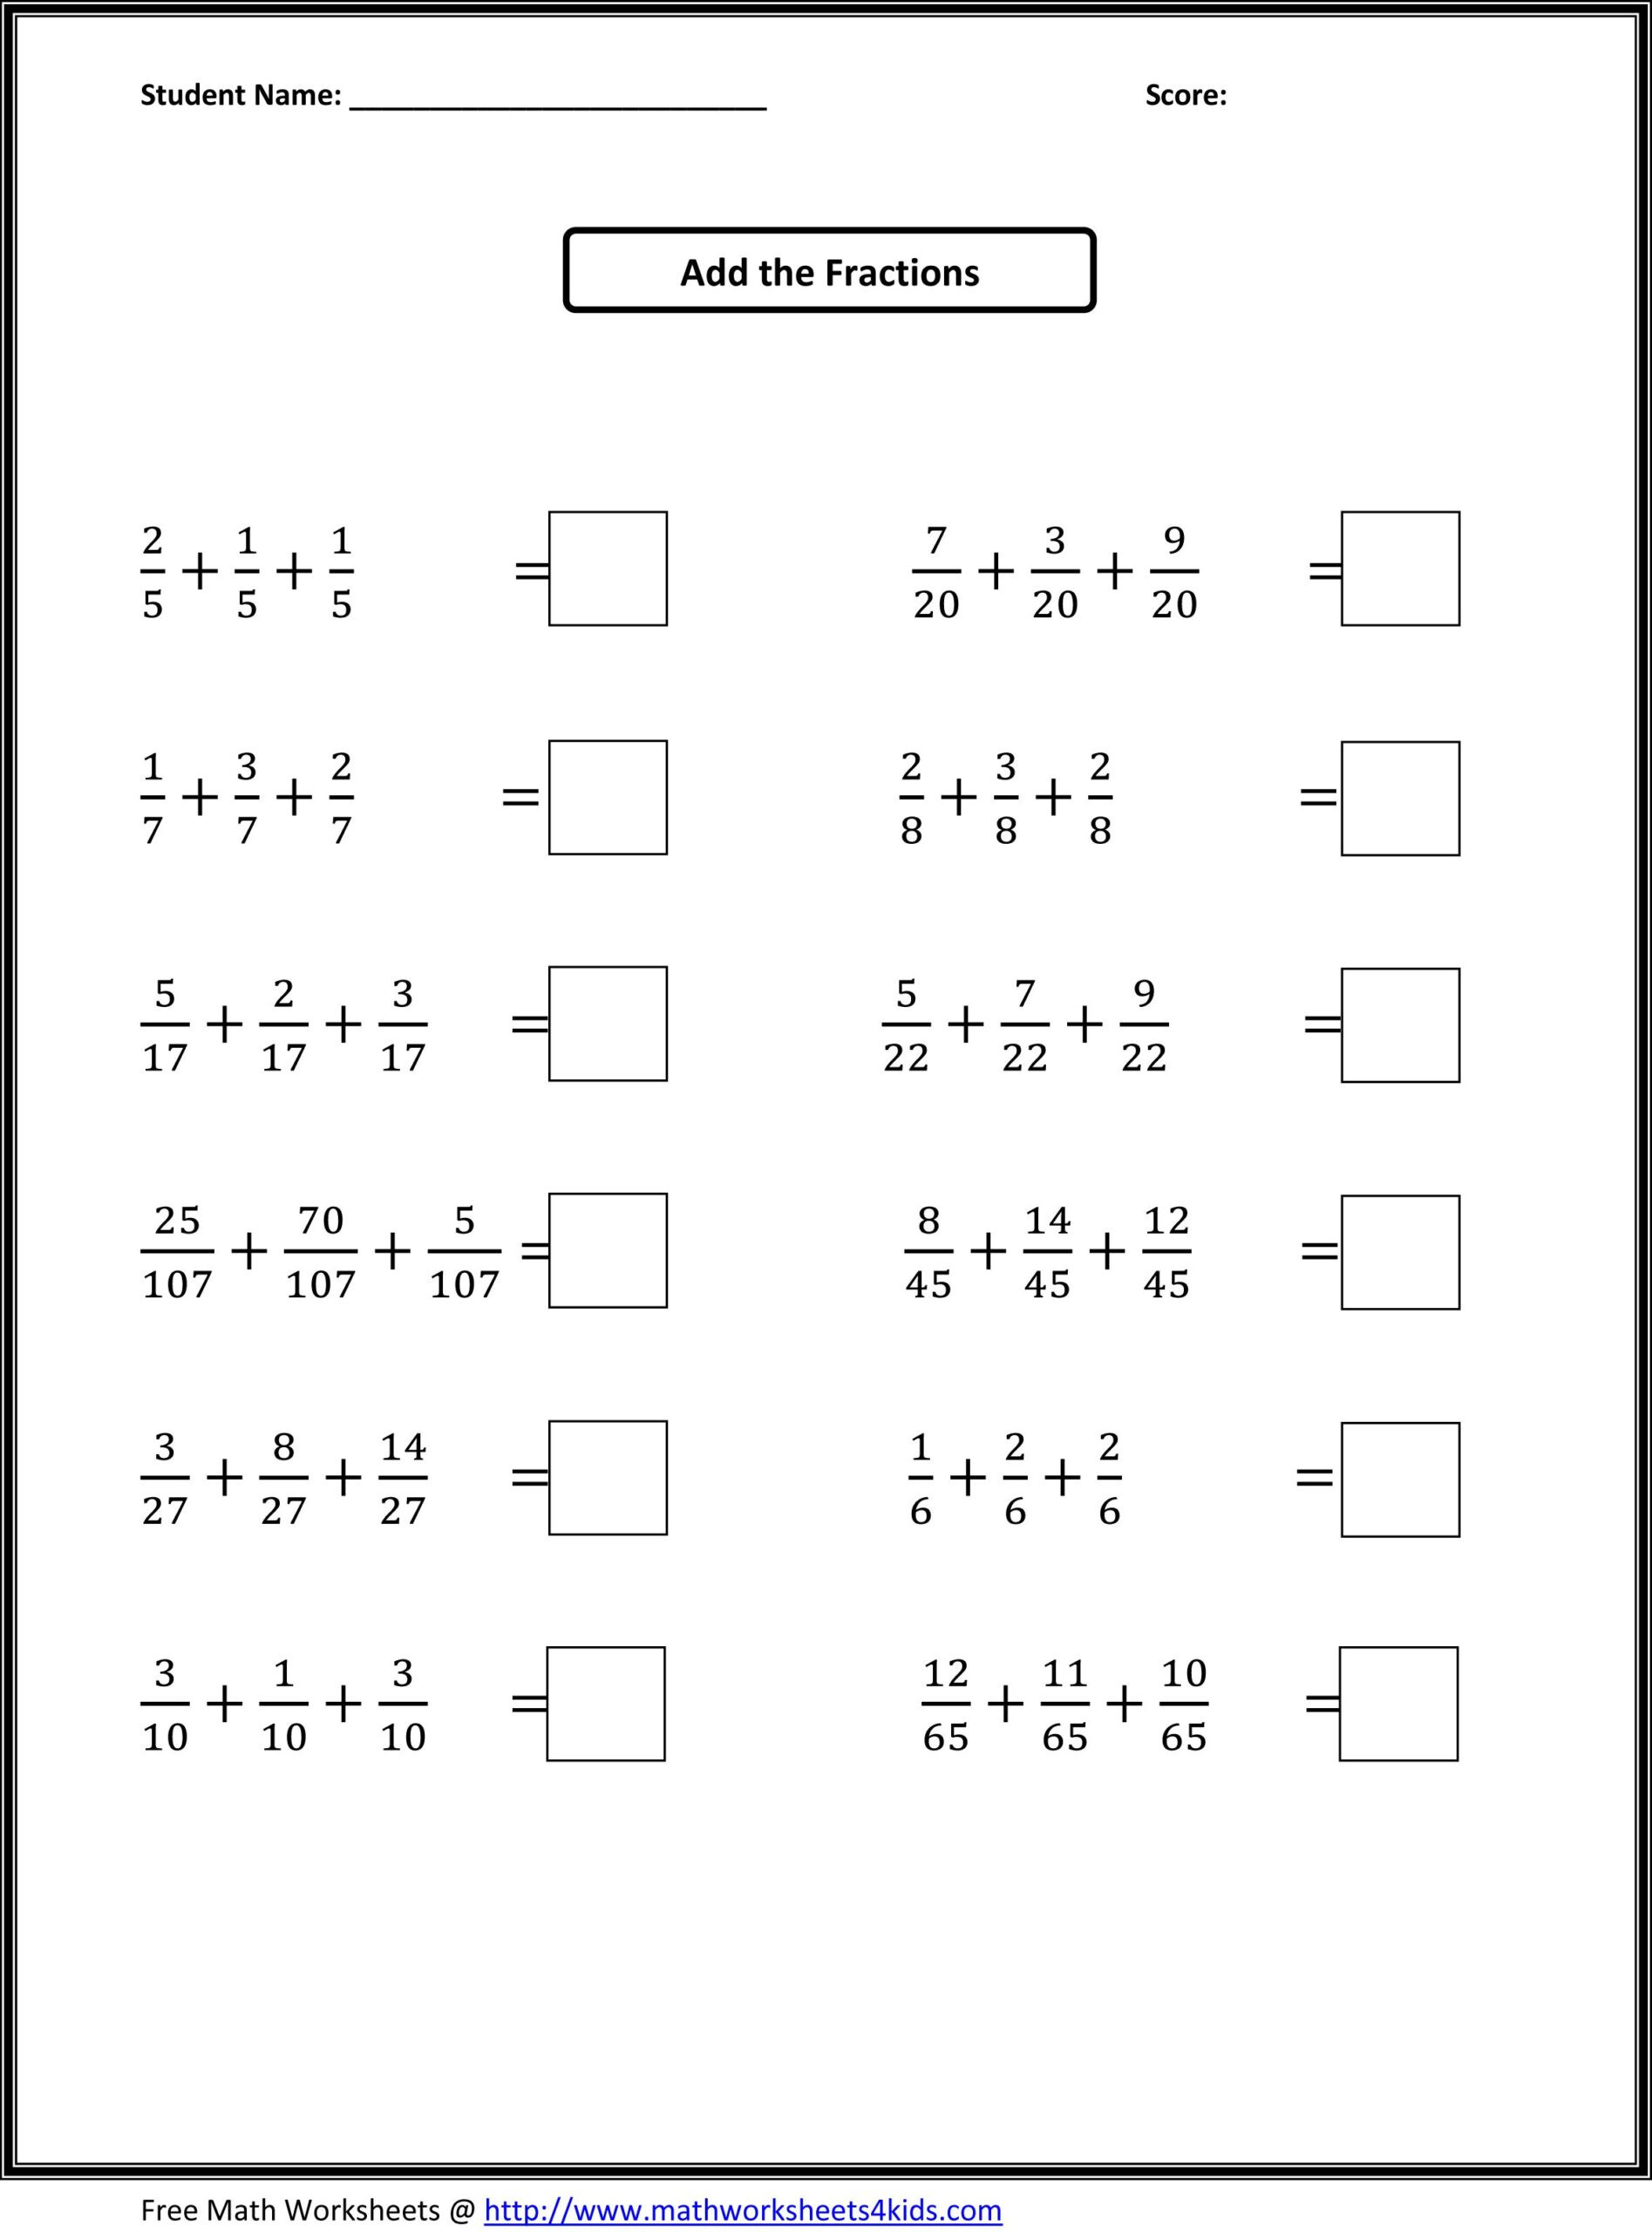 Comparing Fractions and Decimals Worksheet Worksheets for All Grades topics Math Free 10th